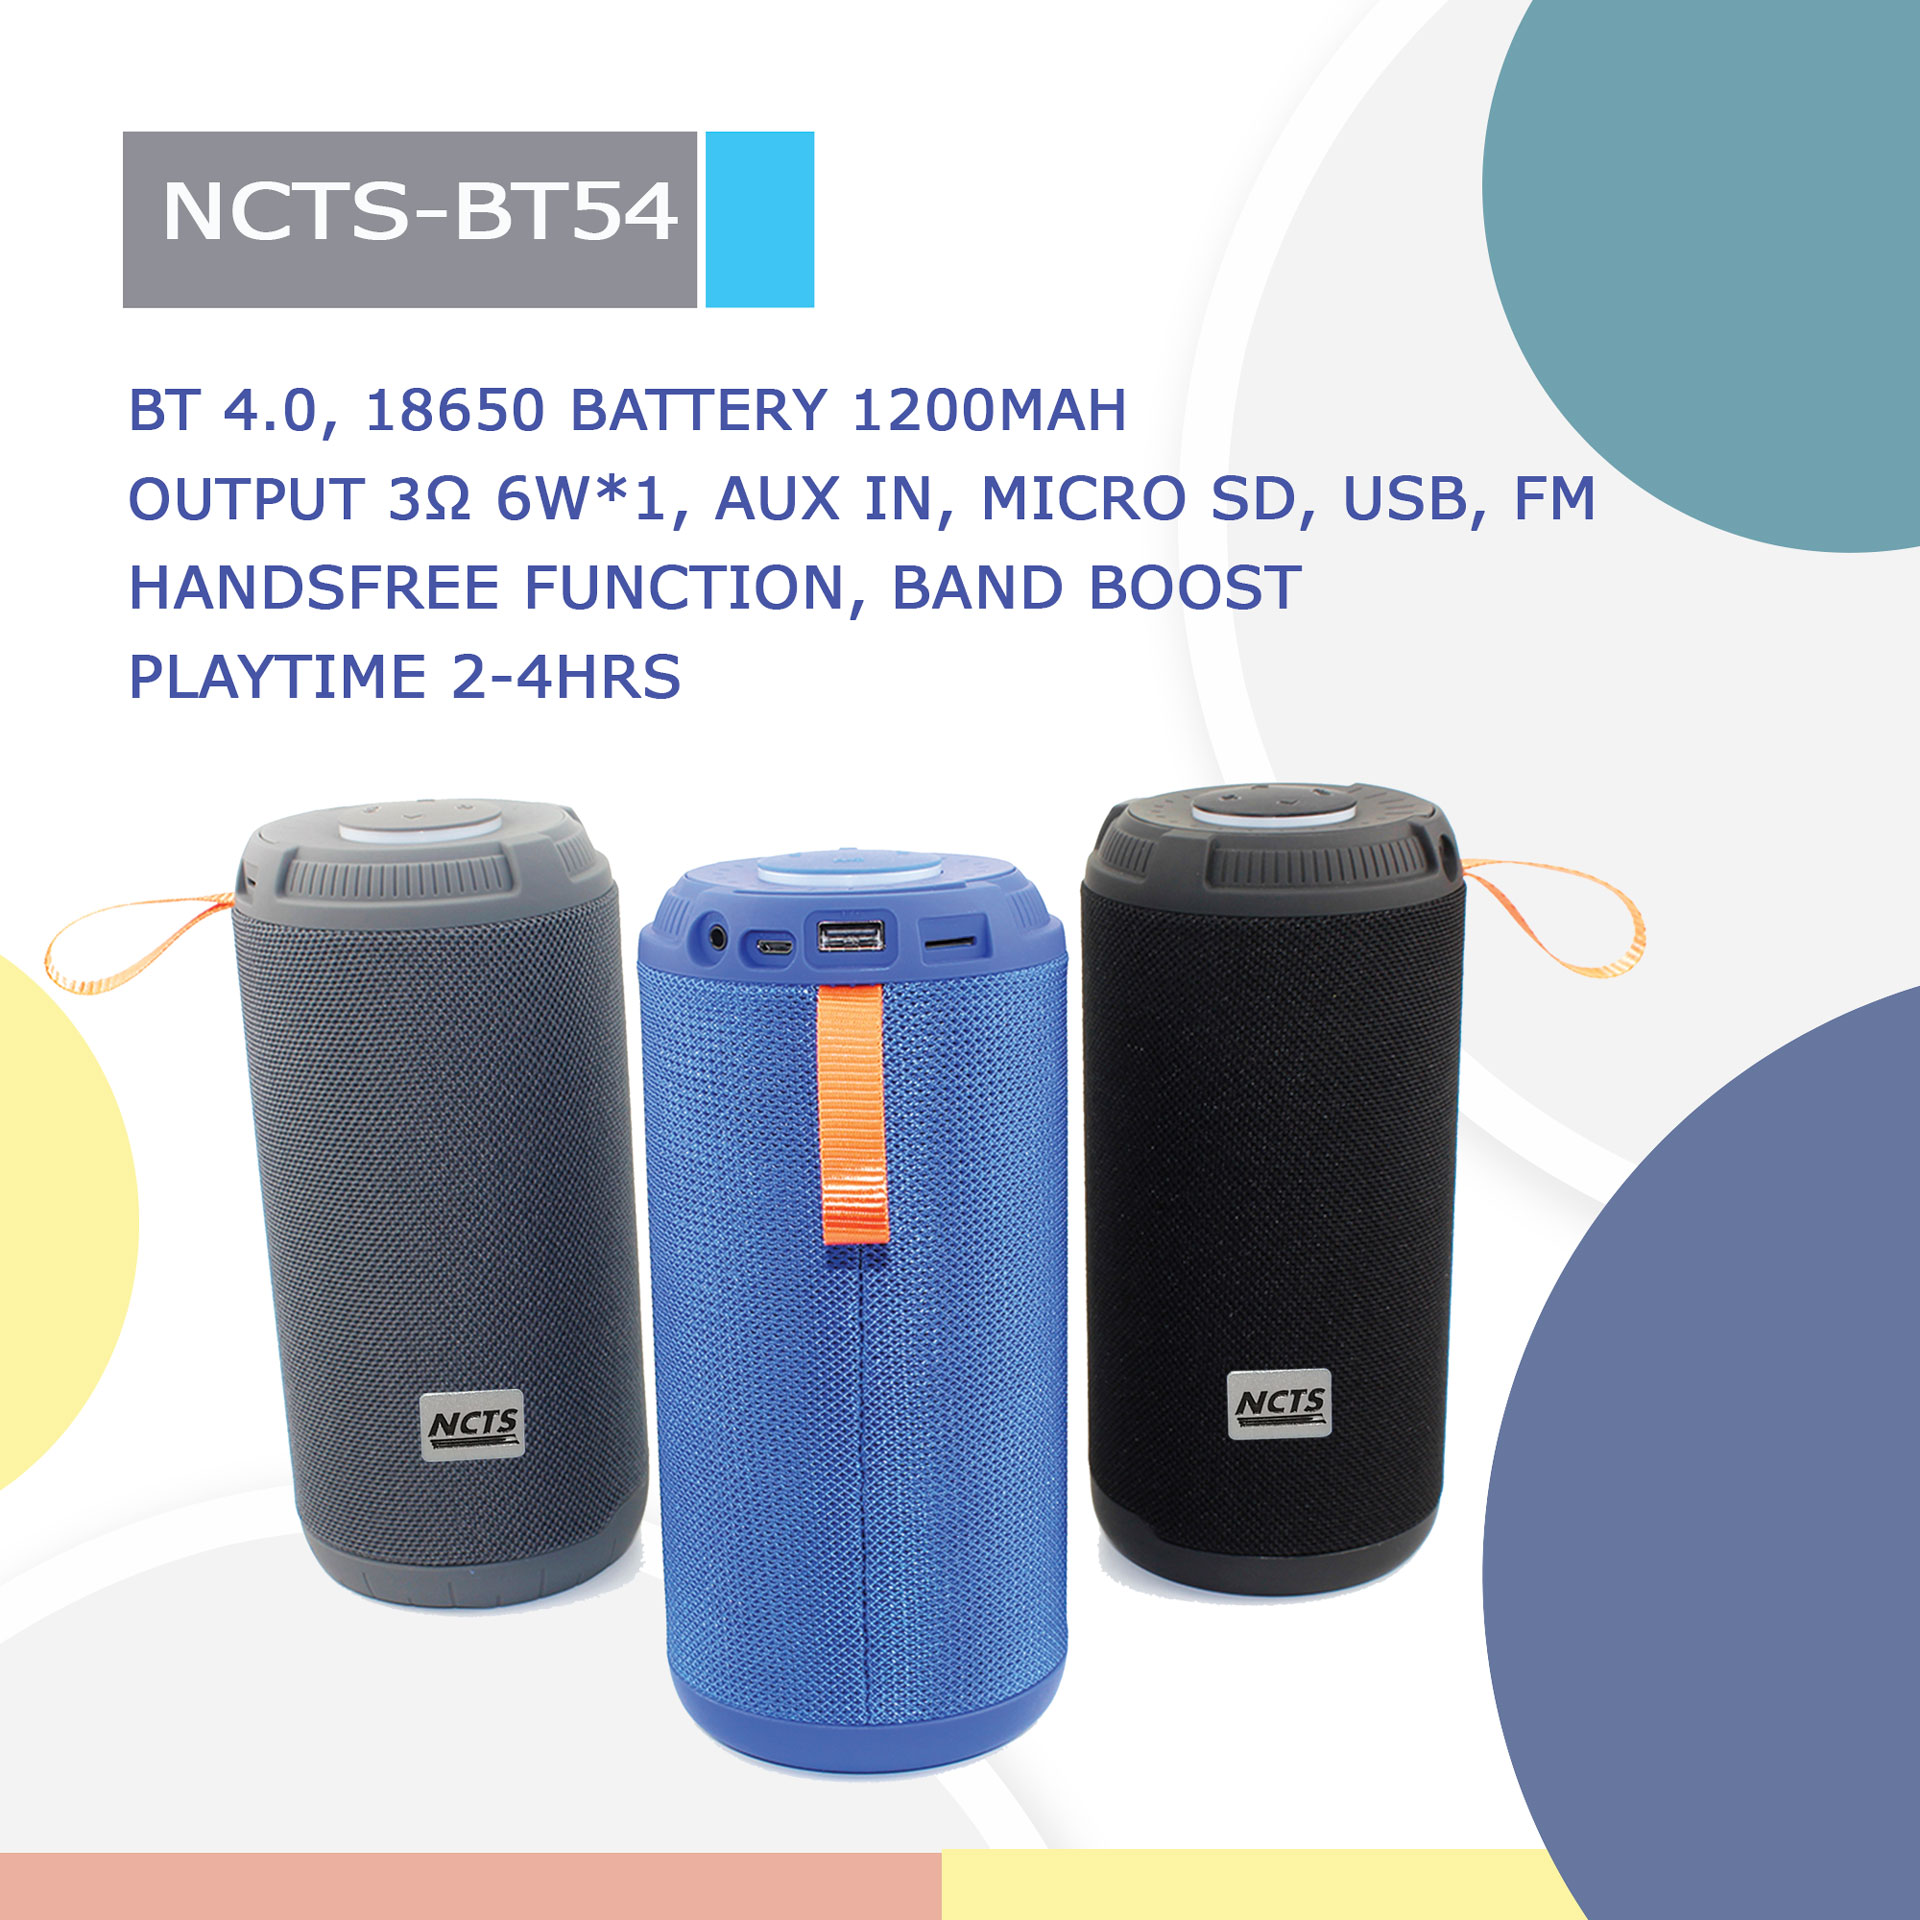 NCTS-BT54